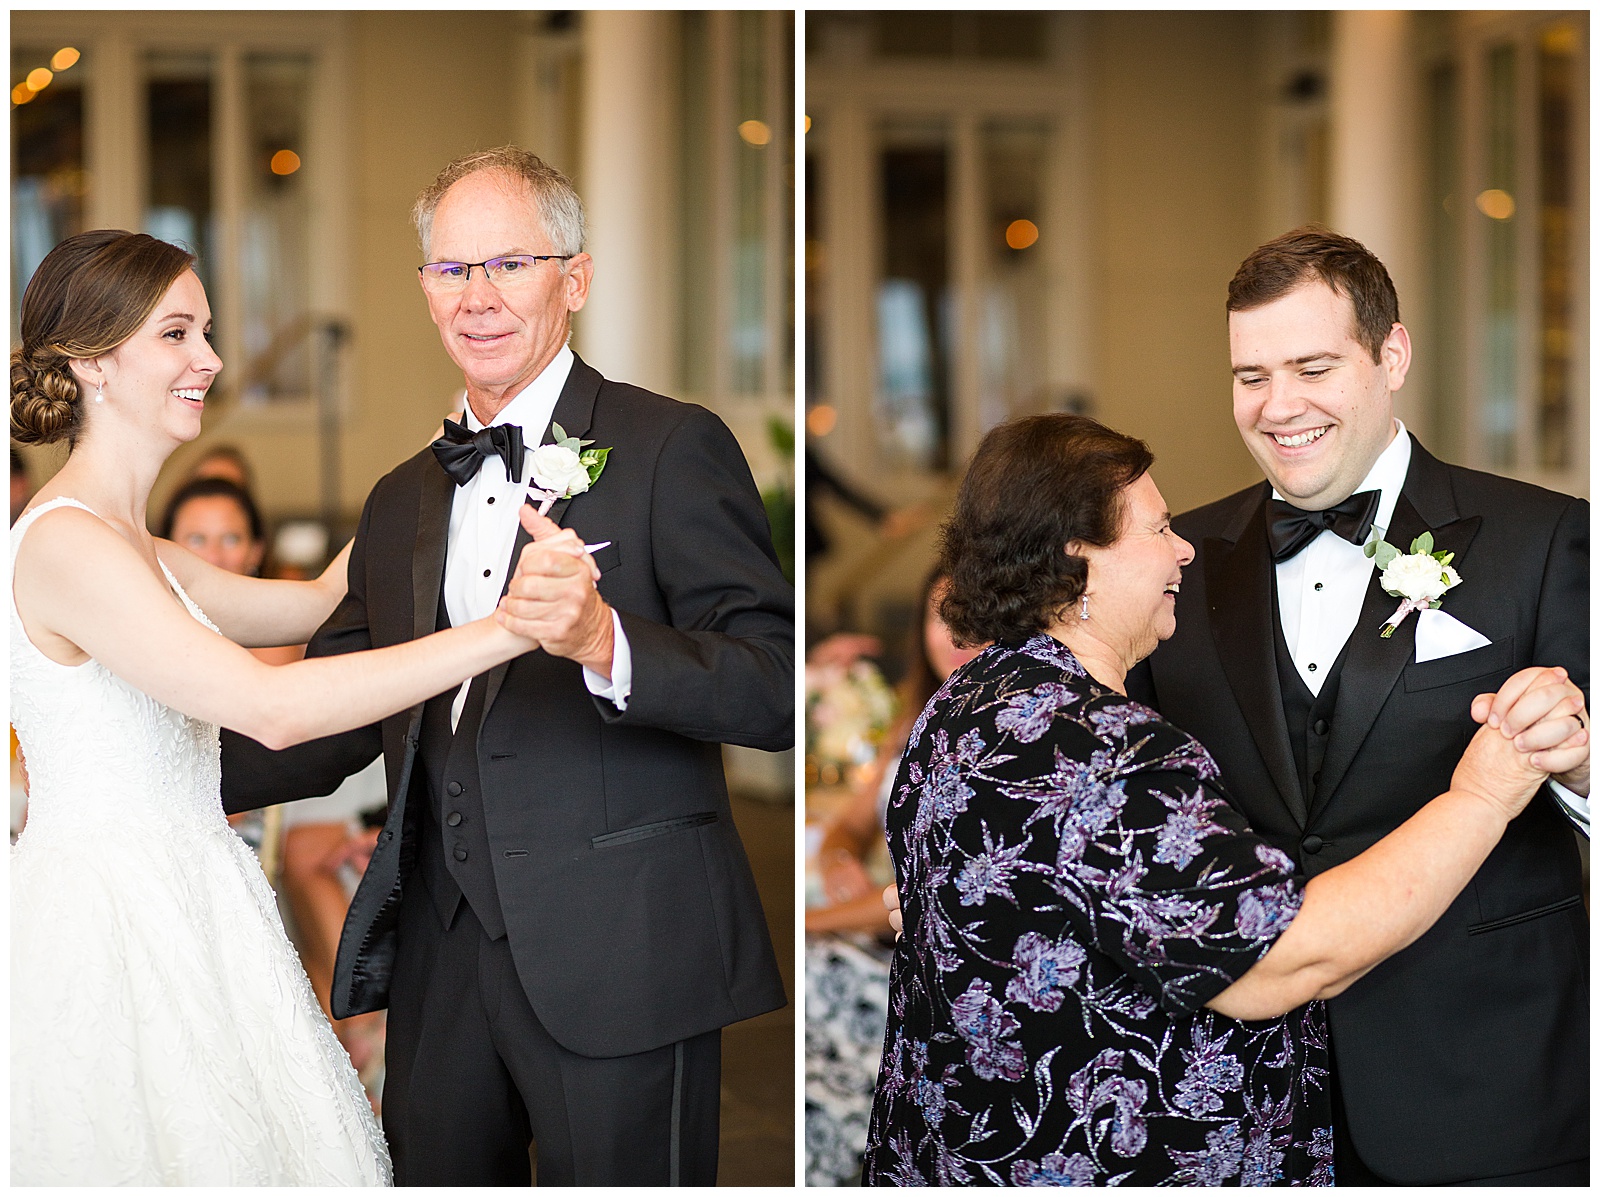 Parents dances with Bride and GRoom at wedding